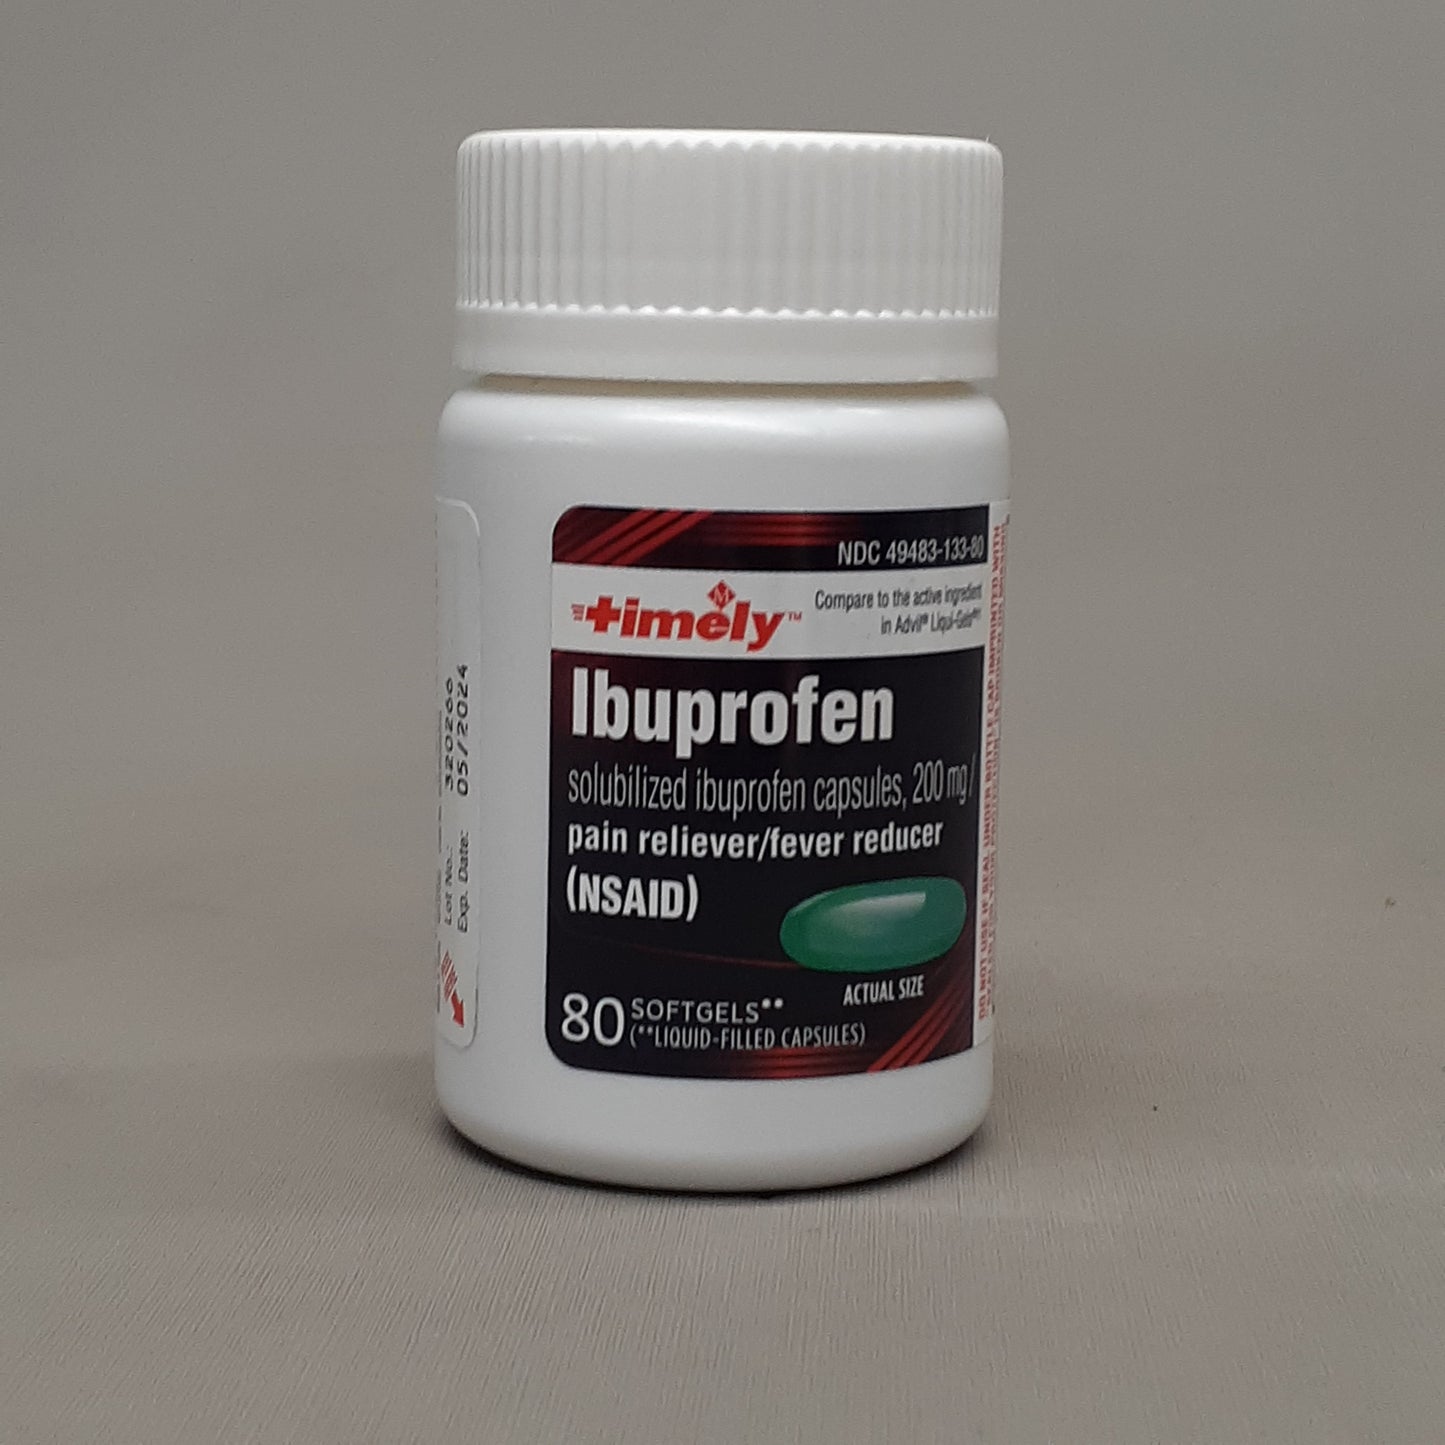 TIMELY Ibuprofen 18-PACK! 80 Softgels 200mg Pain Reliever/Fever Reducer BB 05/24 (New)